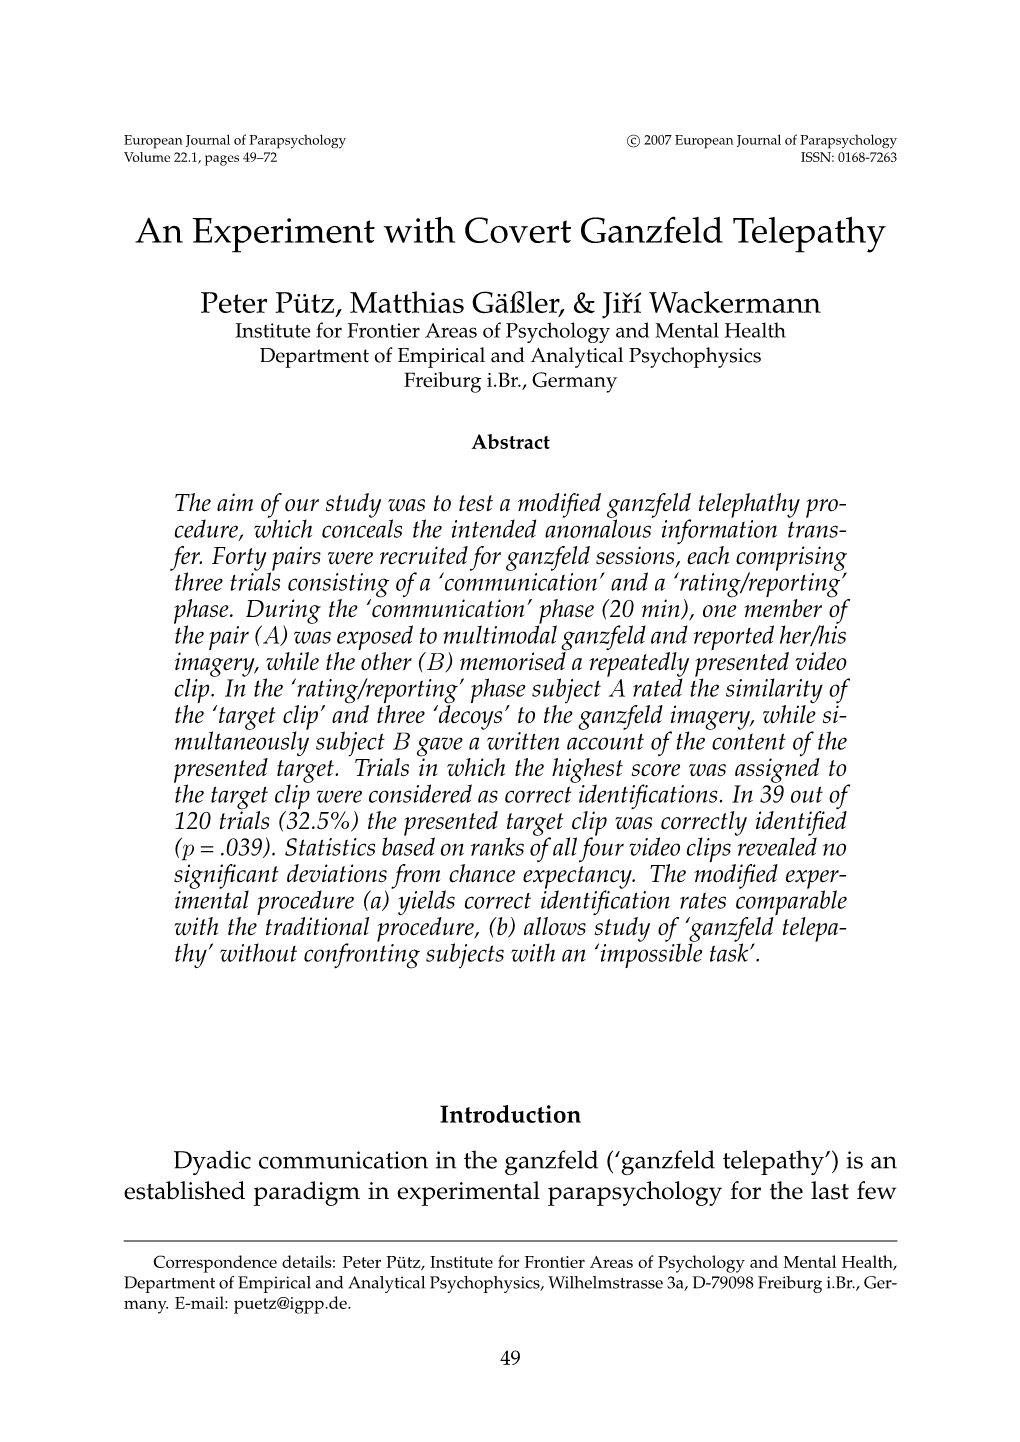 An Experiment with Covert Ganzfeld Telepathy